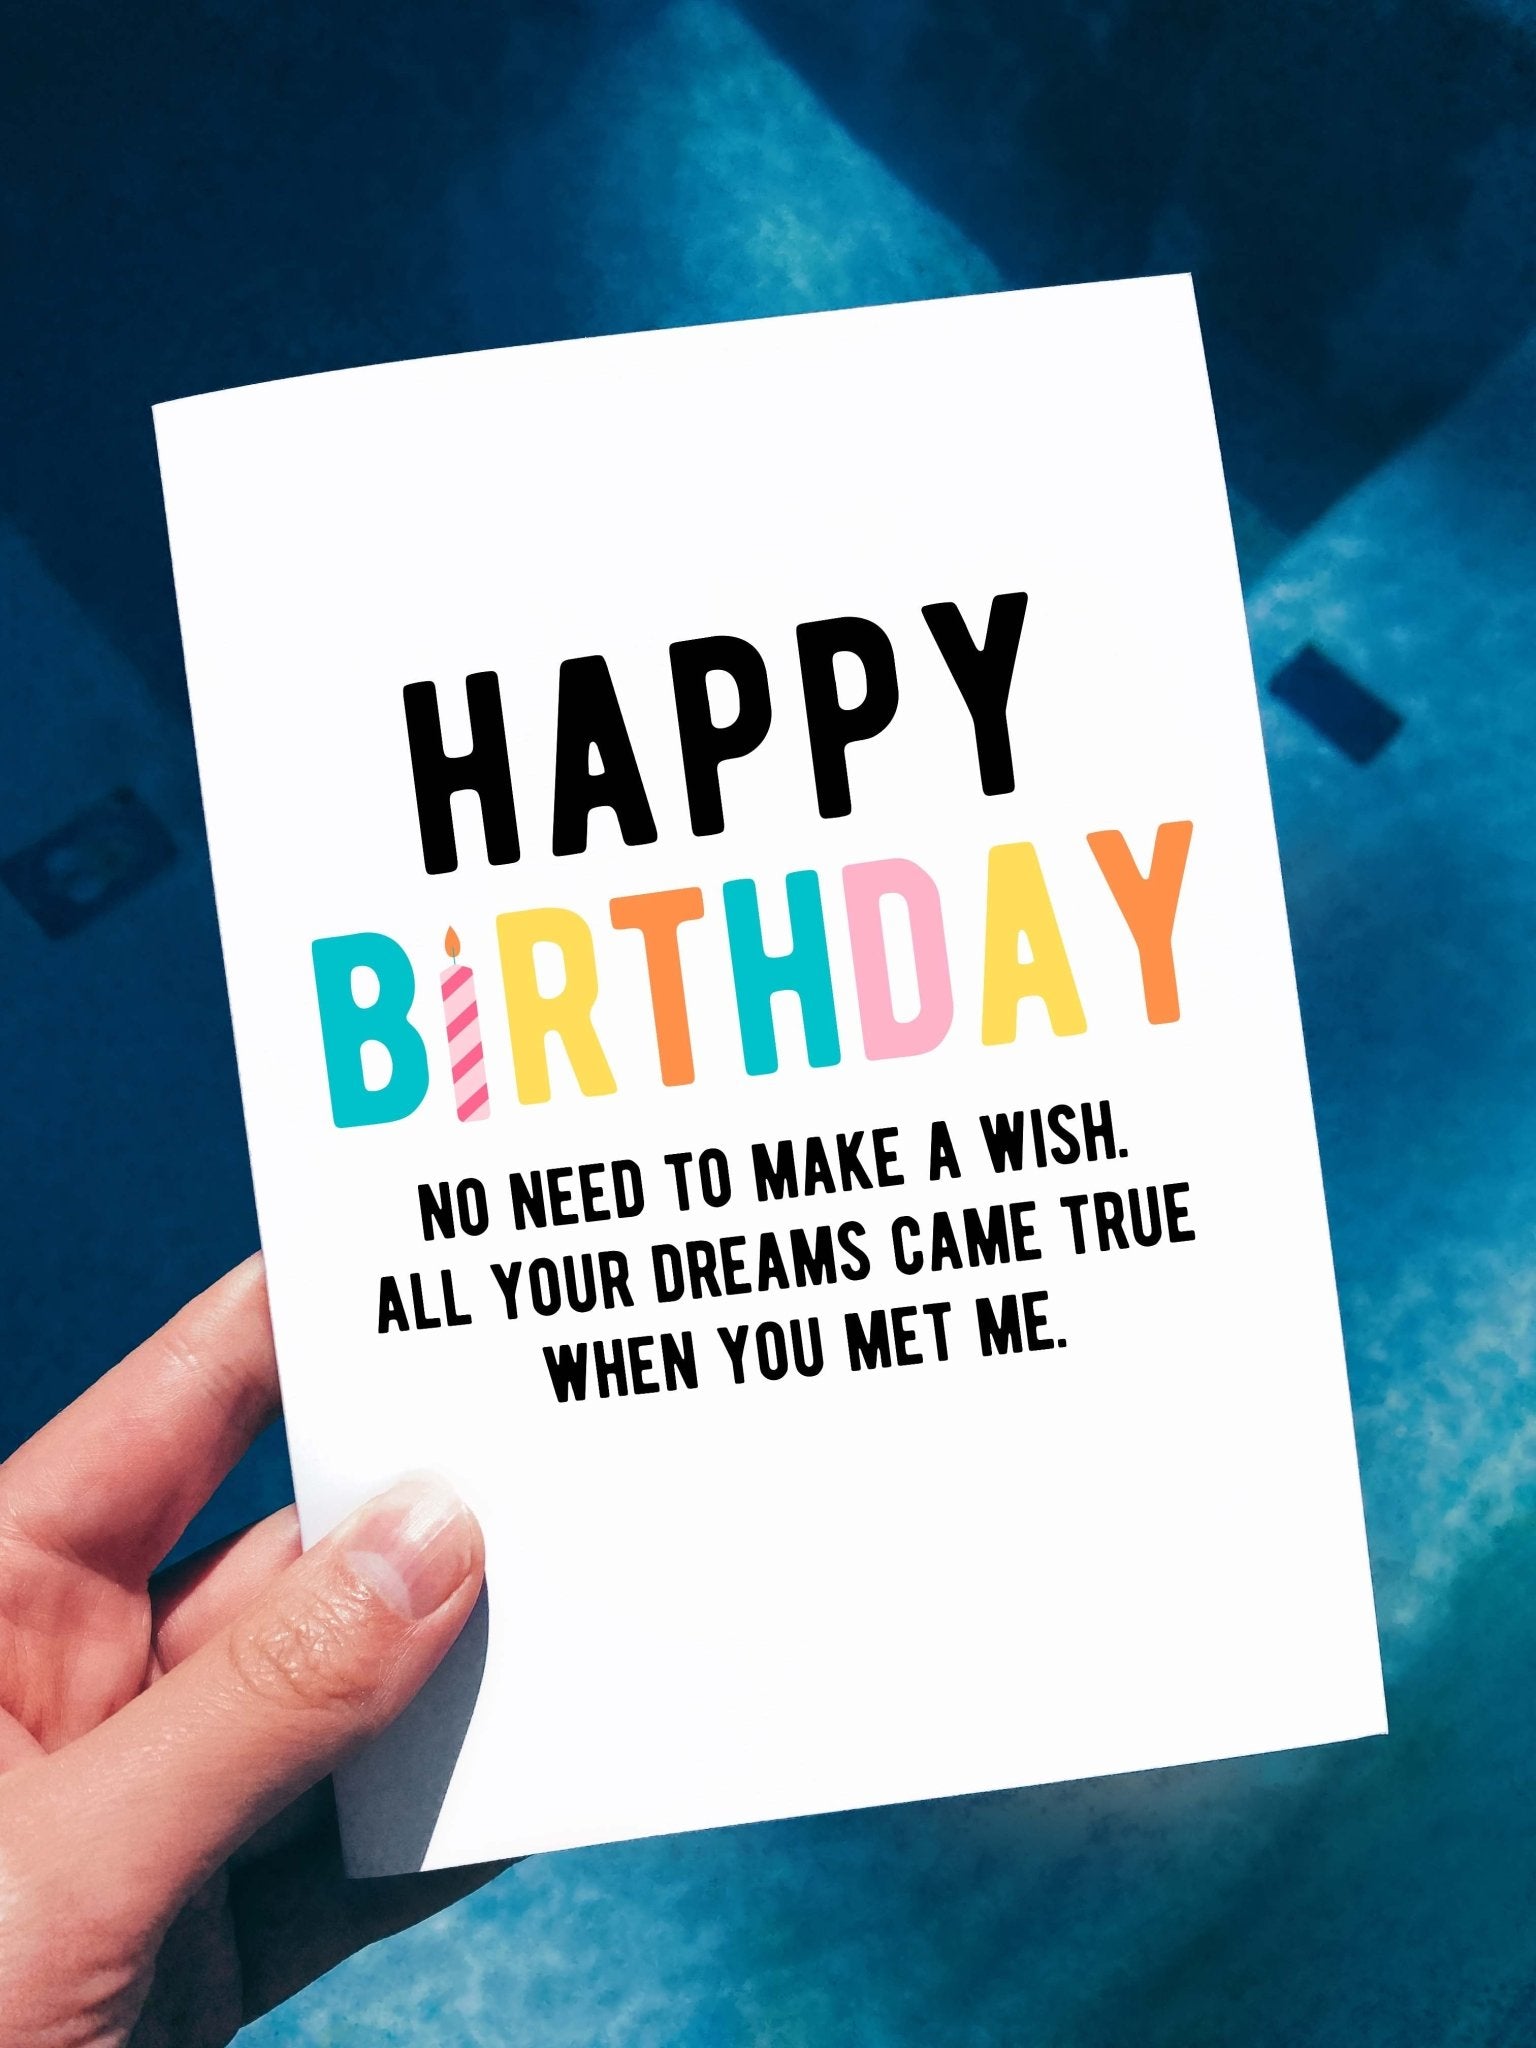 Happy Birthday No Need To Make A Wish All Your Dreams Came True When You Met Me Birthday Card - UntamedEgo LLC.